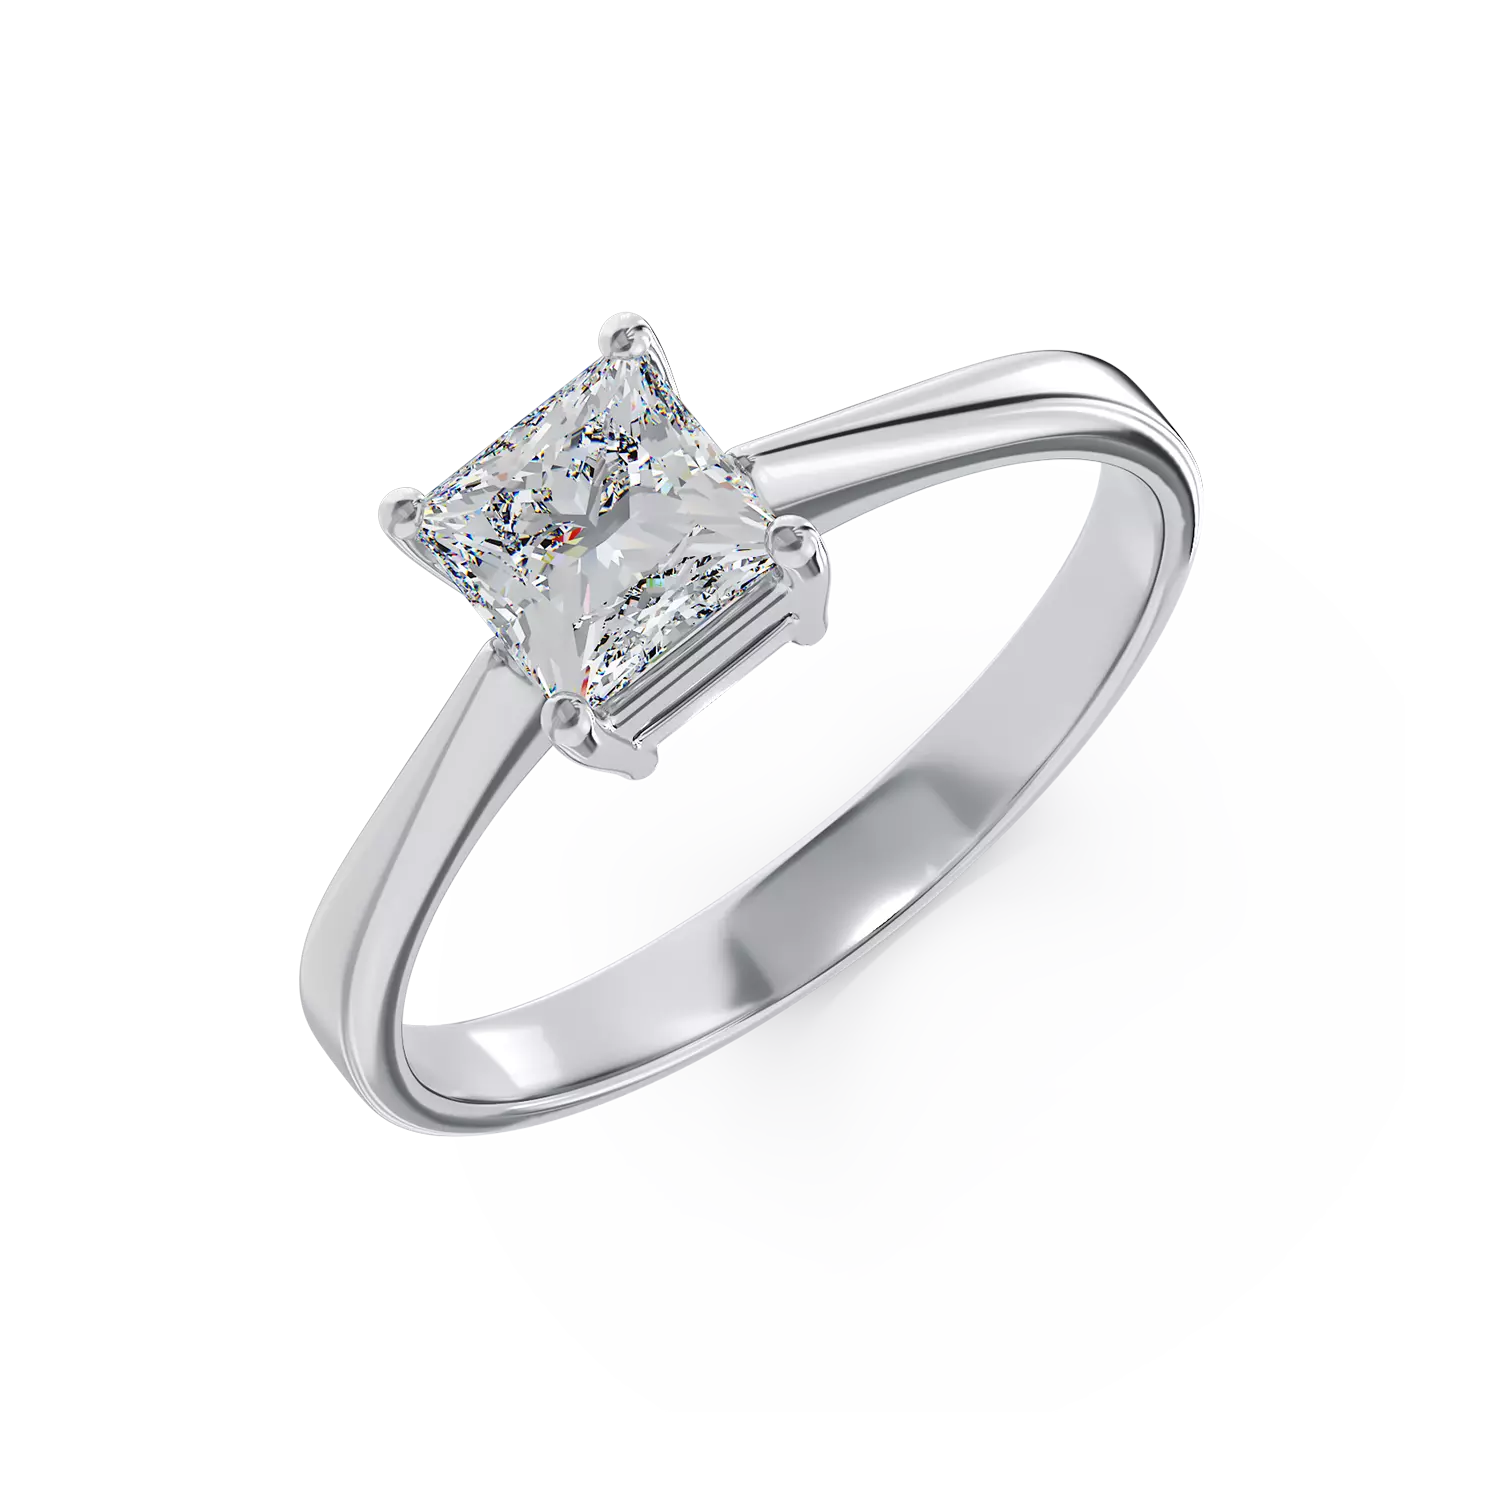 18K white gold engagement ring with a 0.91ct solitaire diamond